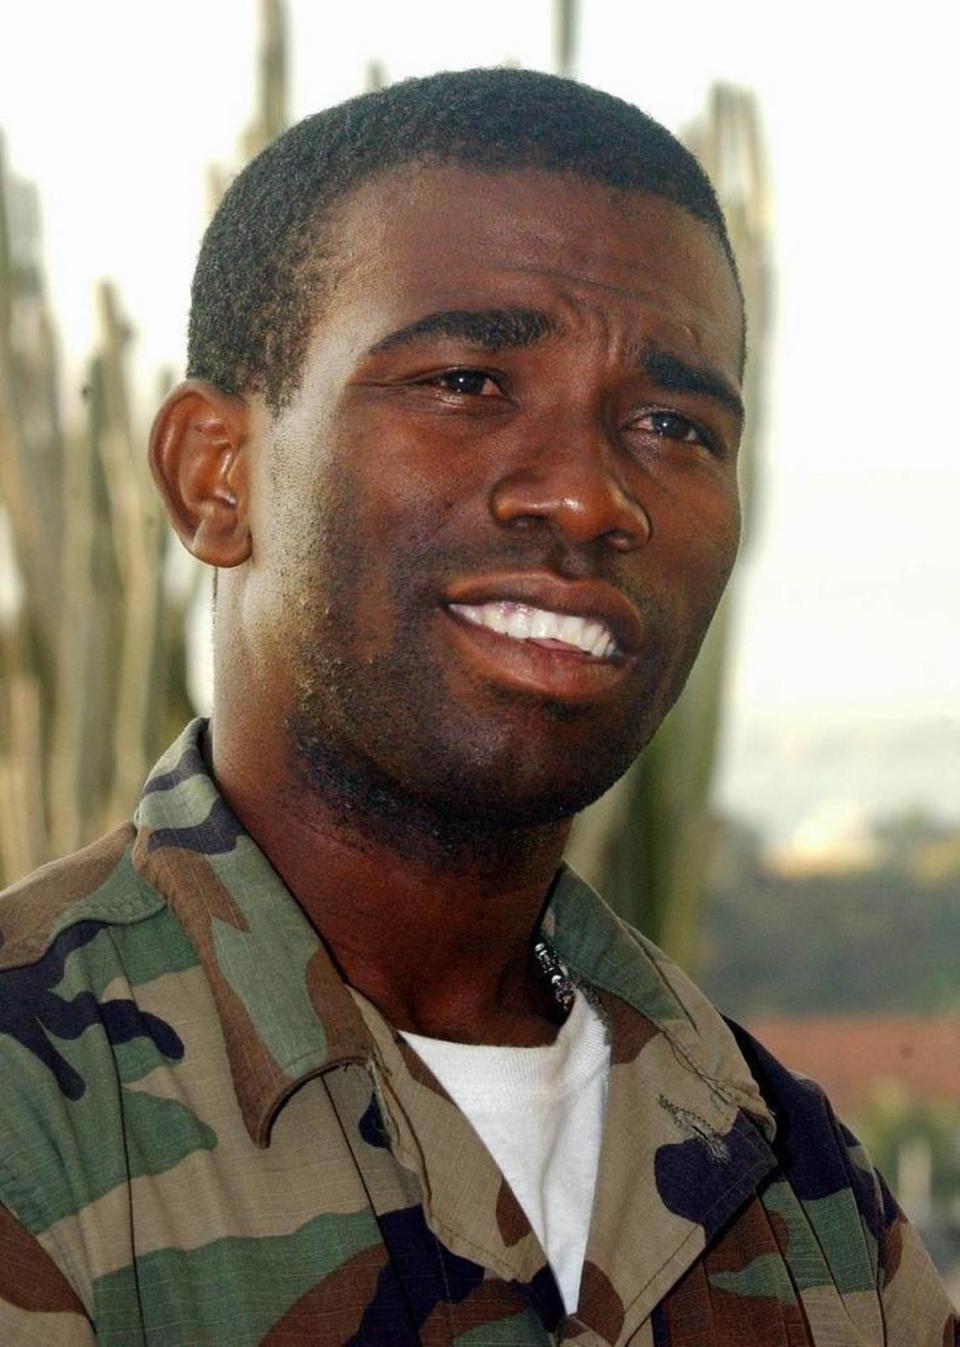 Haitian rebel leader Guy Philippe, photographed in 2004, was sentenced to nine years in U.S. prison after pleading guilty to a drug-related money-laundering charge.